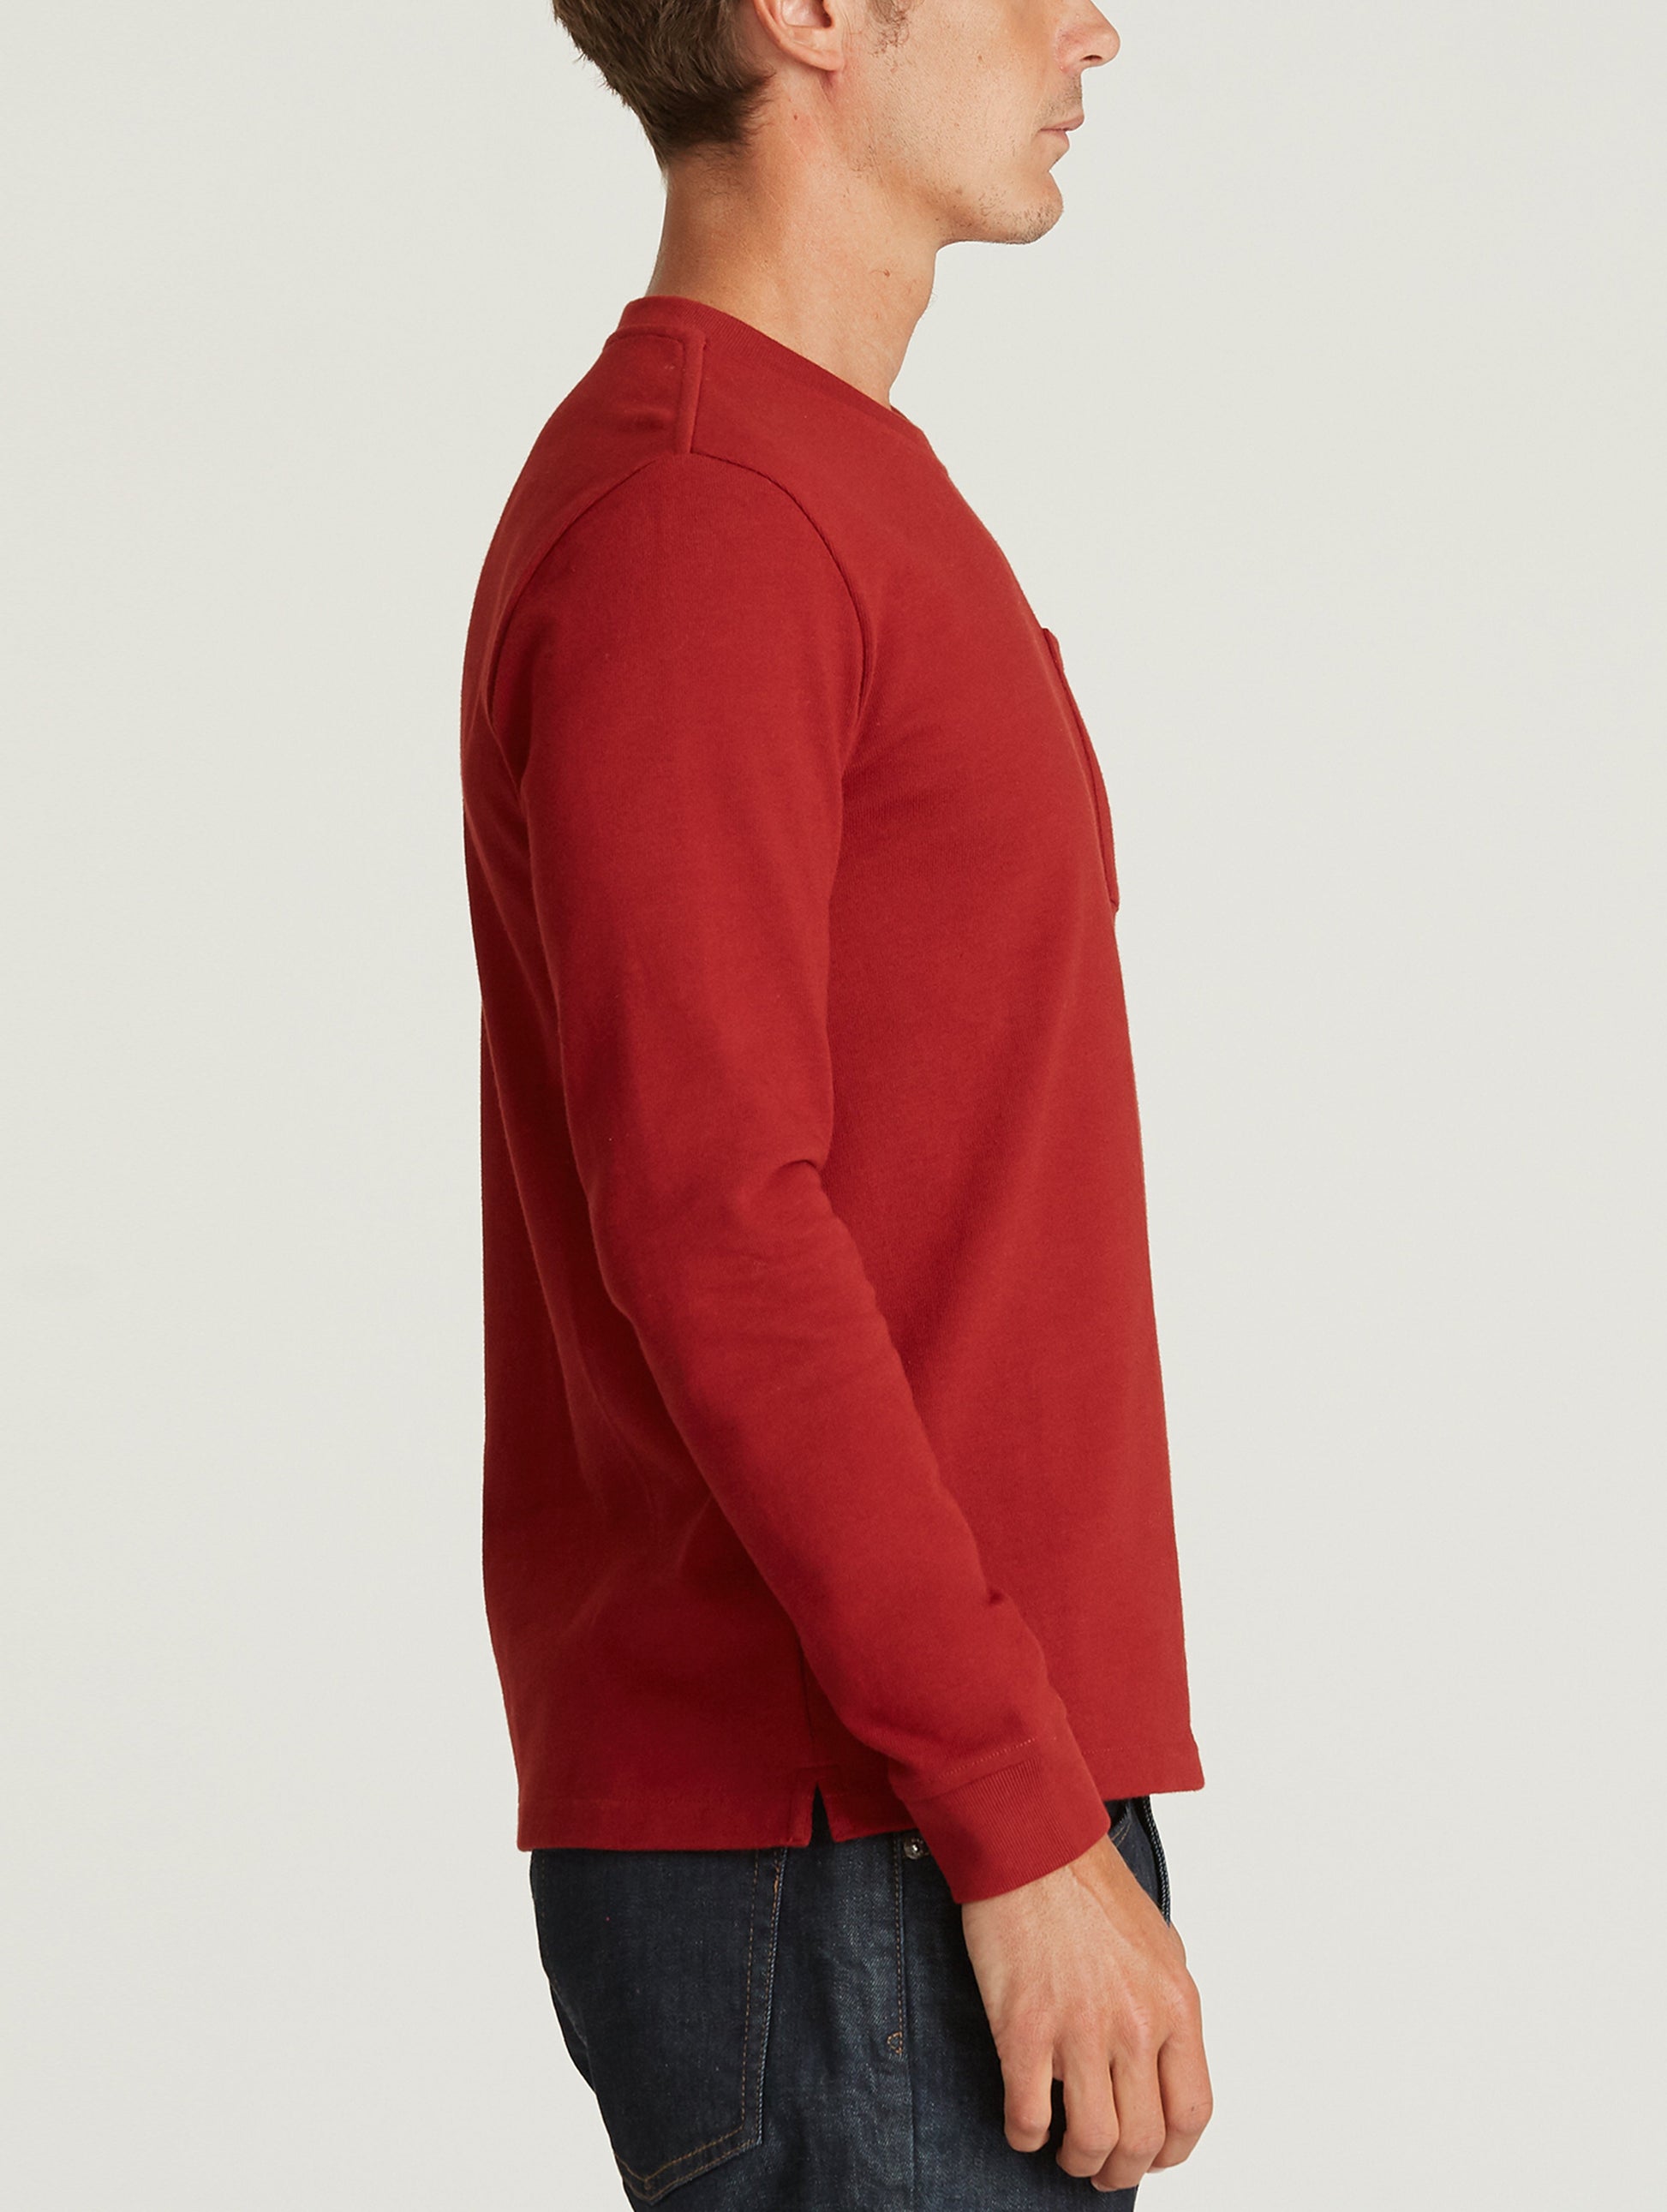 man wearing red long sleeve shirt with pocket